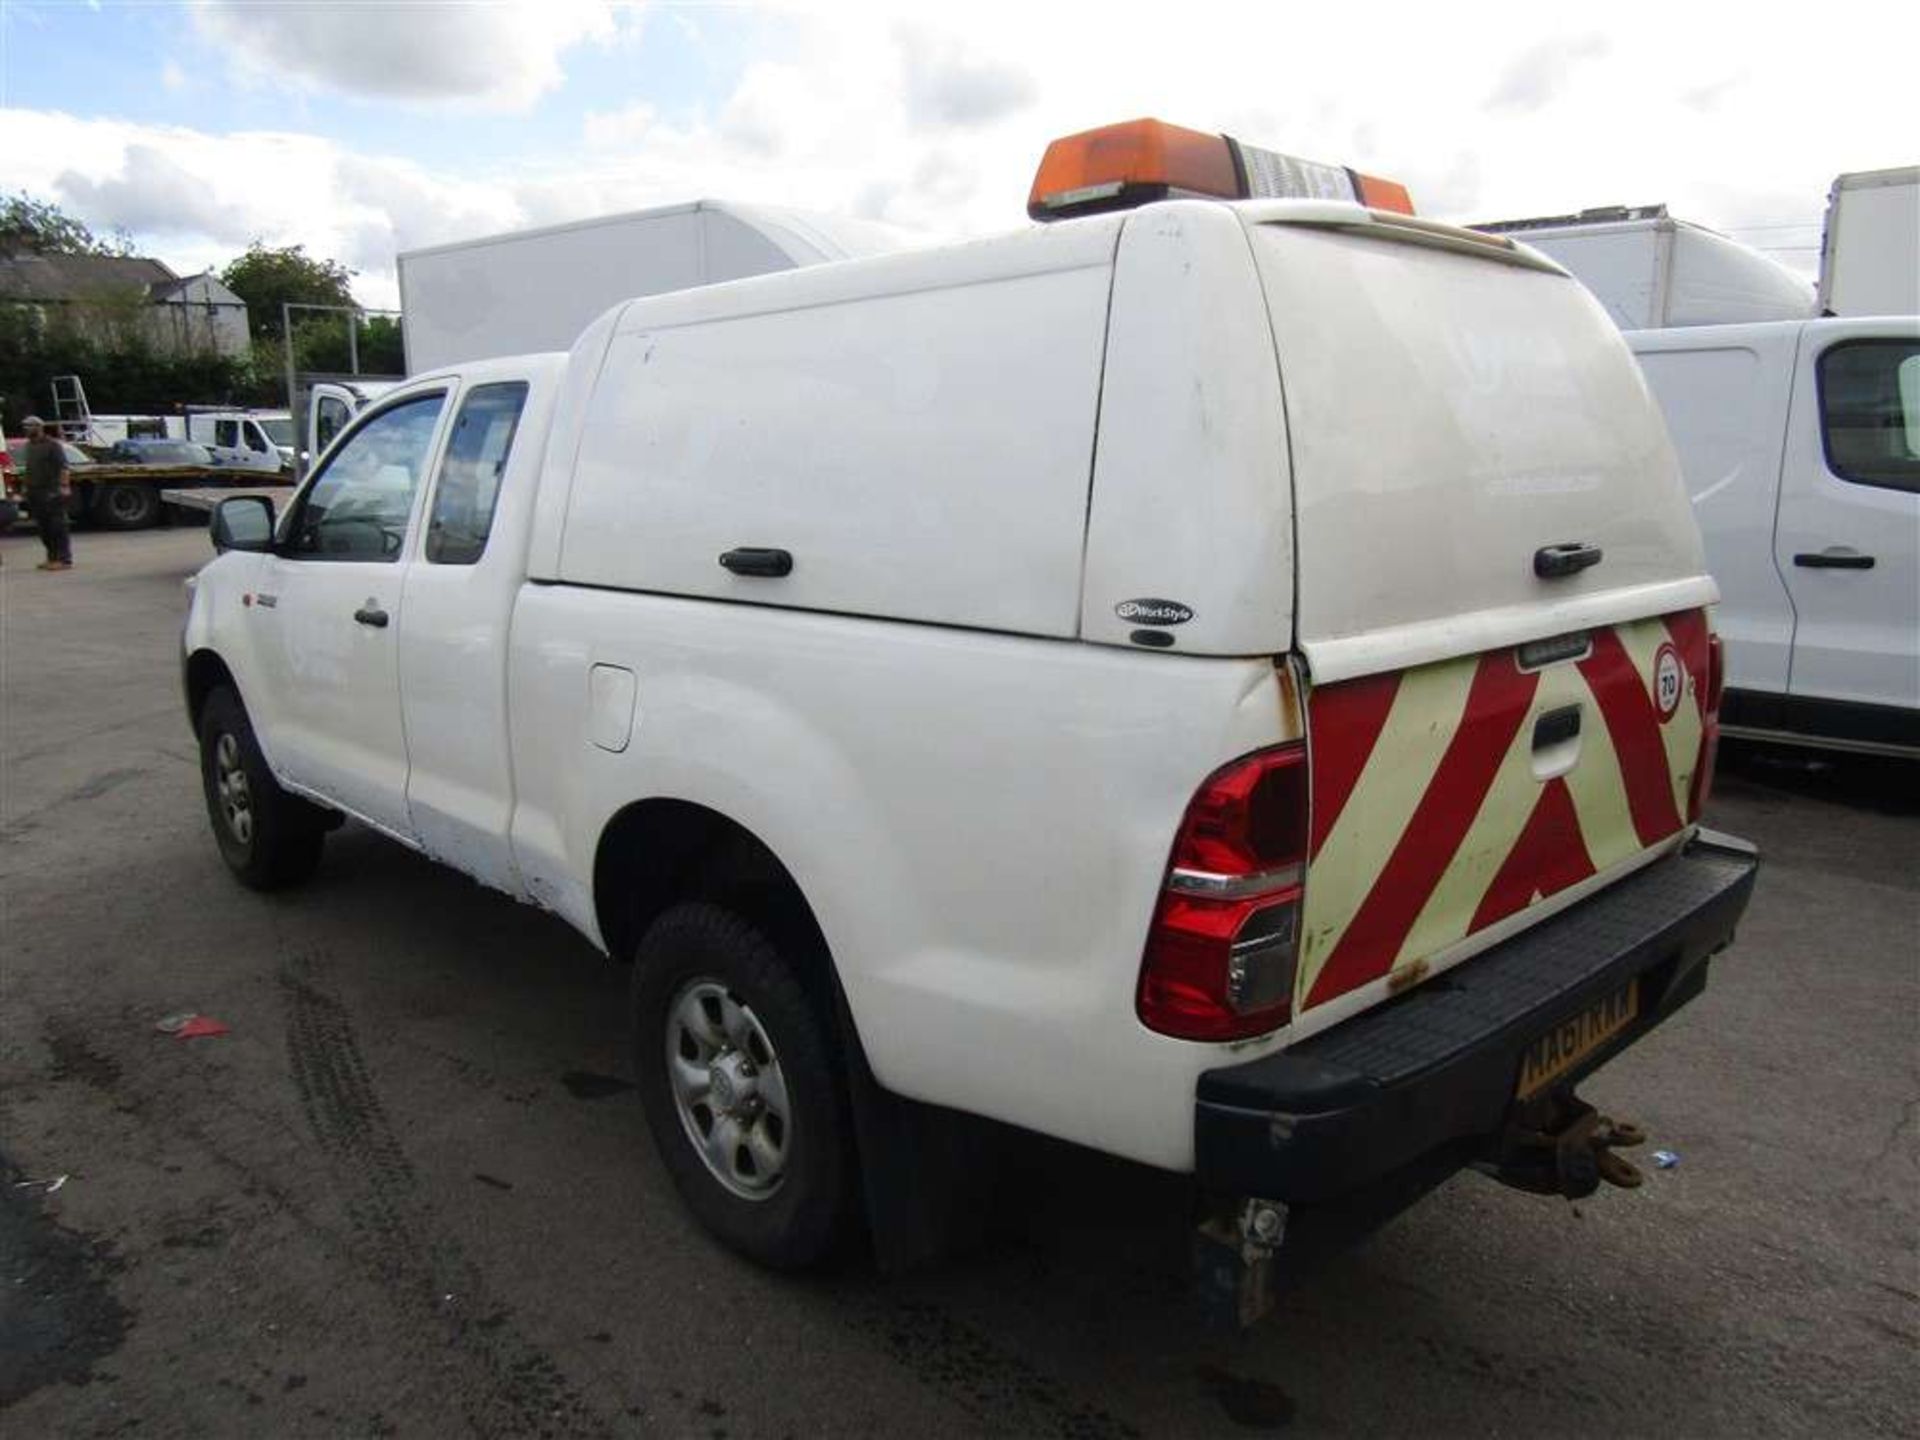 2011 61 reg Toyota Hilux HL2 D-4D 4x4 ECB (Direct United Utilities Water) - Image 3 of 6